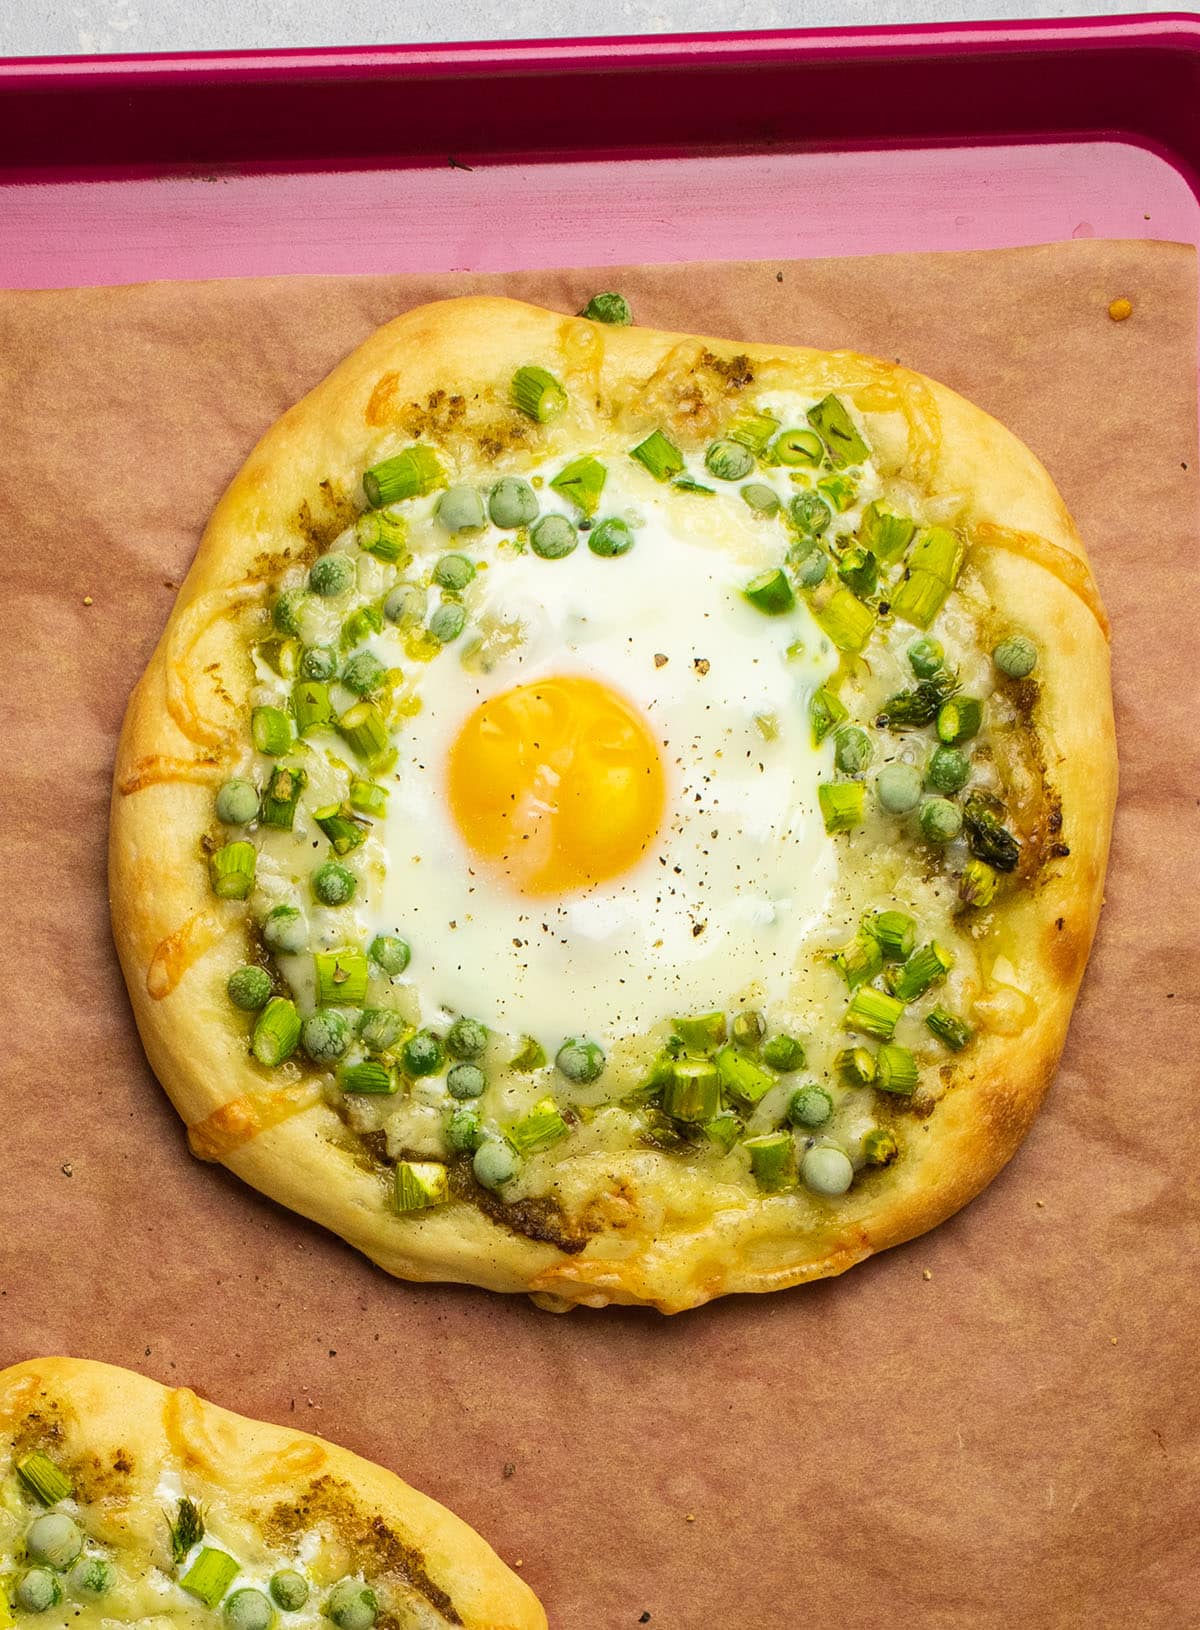 Pizza with peas, asparagus, and a baked egg.